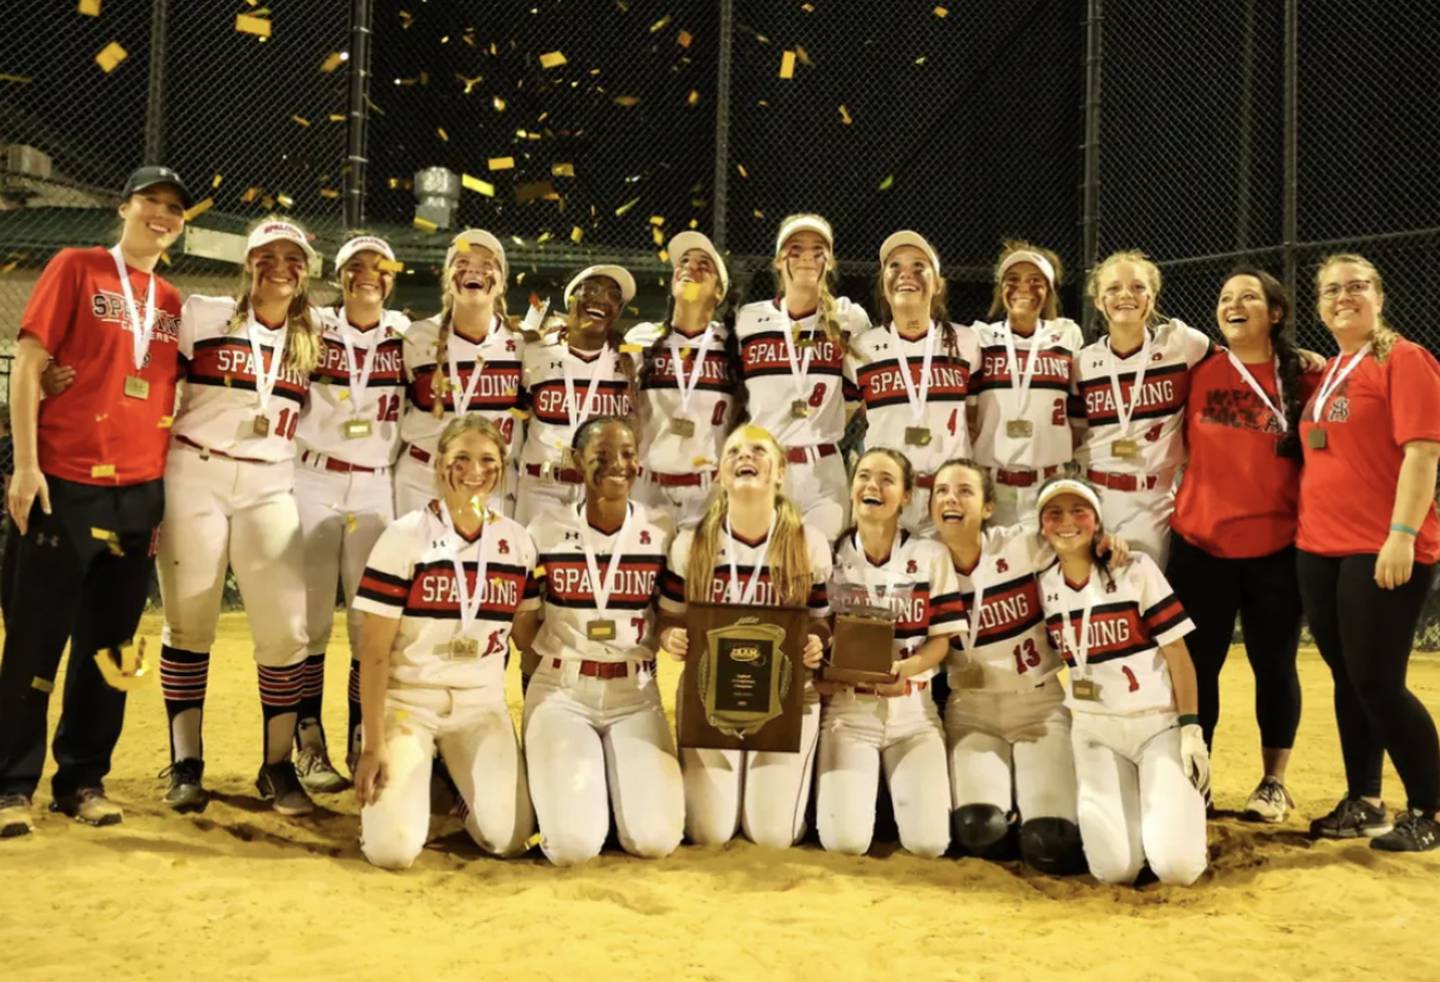 It was another championship celebration last spring for Archbishop Spalding, which claimed its third straight IAAM A Conference championship. The Cavaliers are the No. 1 team in the Baltimore Banner/Varsity Sports Network Preseason Softball Top 15 poll.